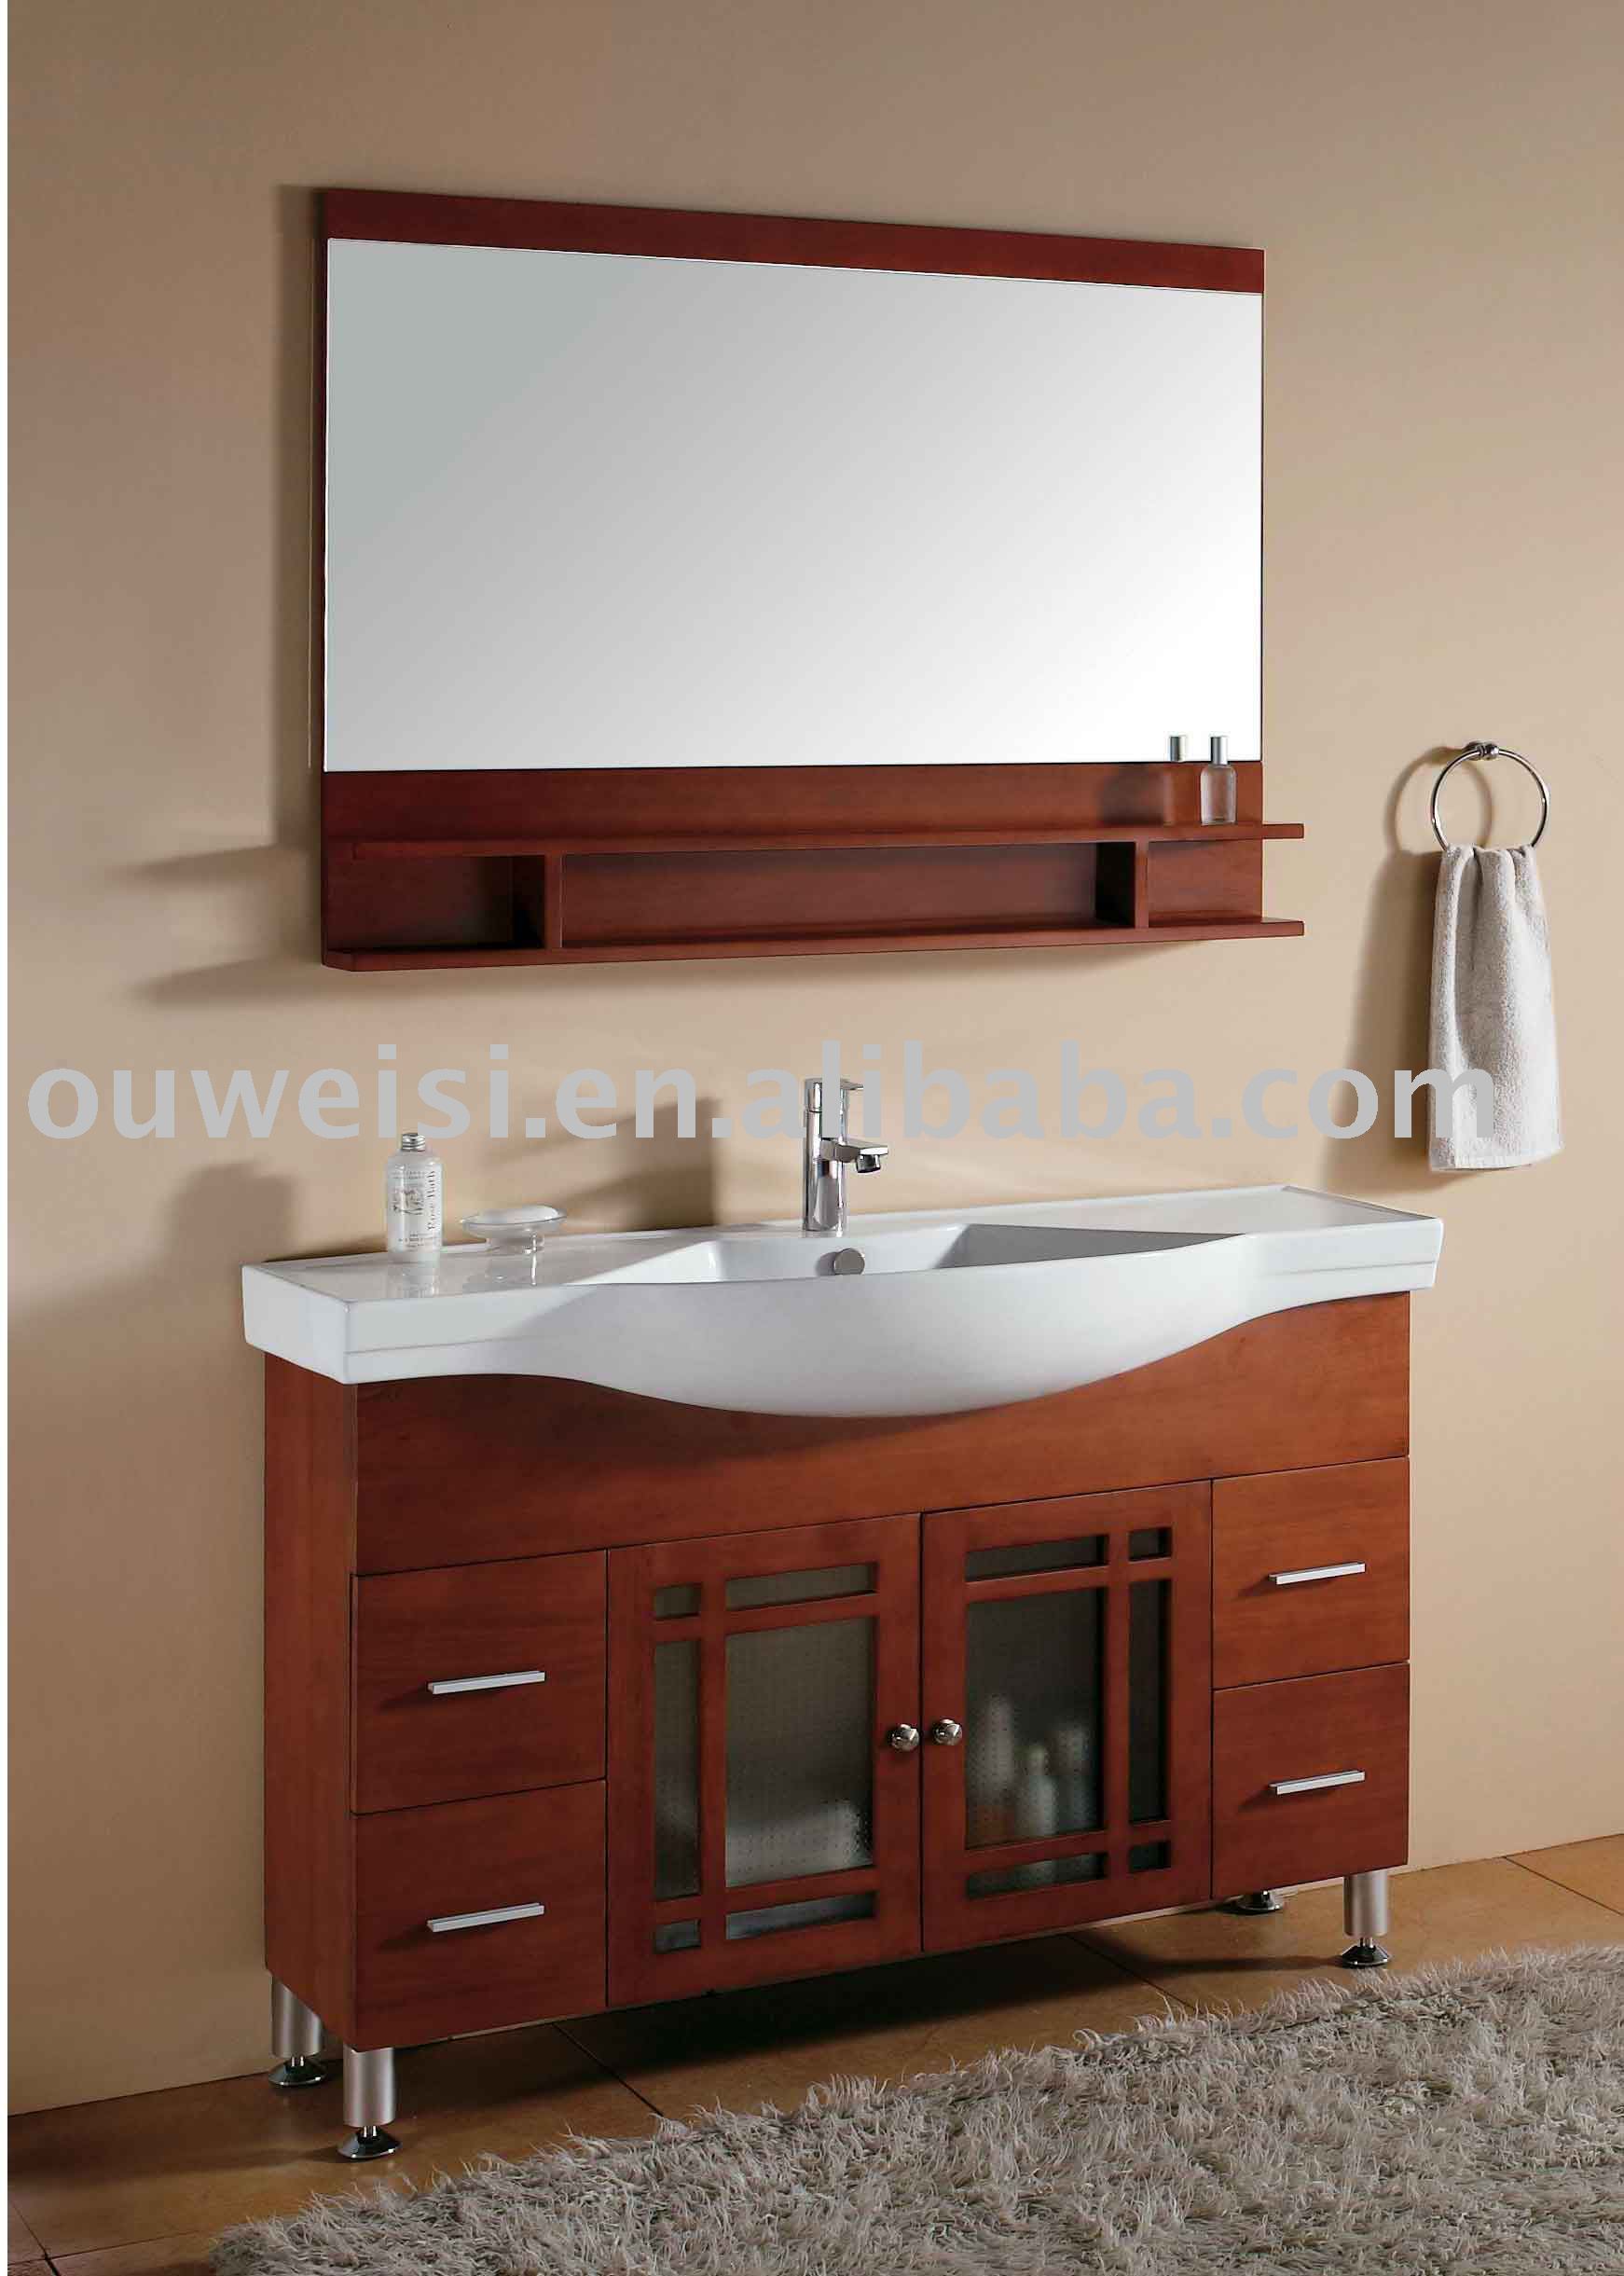 COUNTRY FRENCH BATHROOM VANITY CABINETS IN PLUMBING SUPPLIES